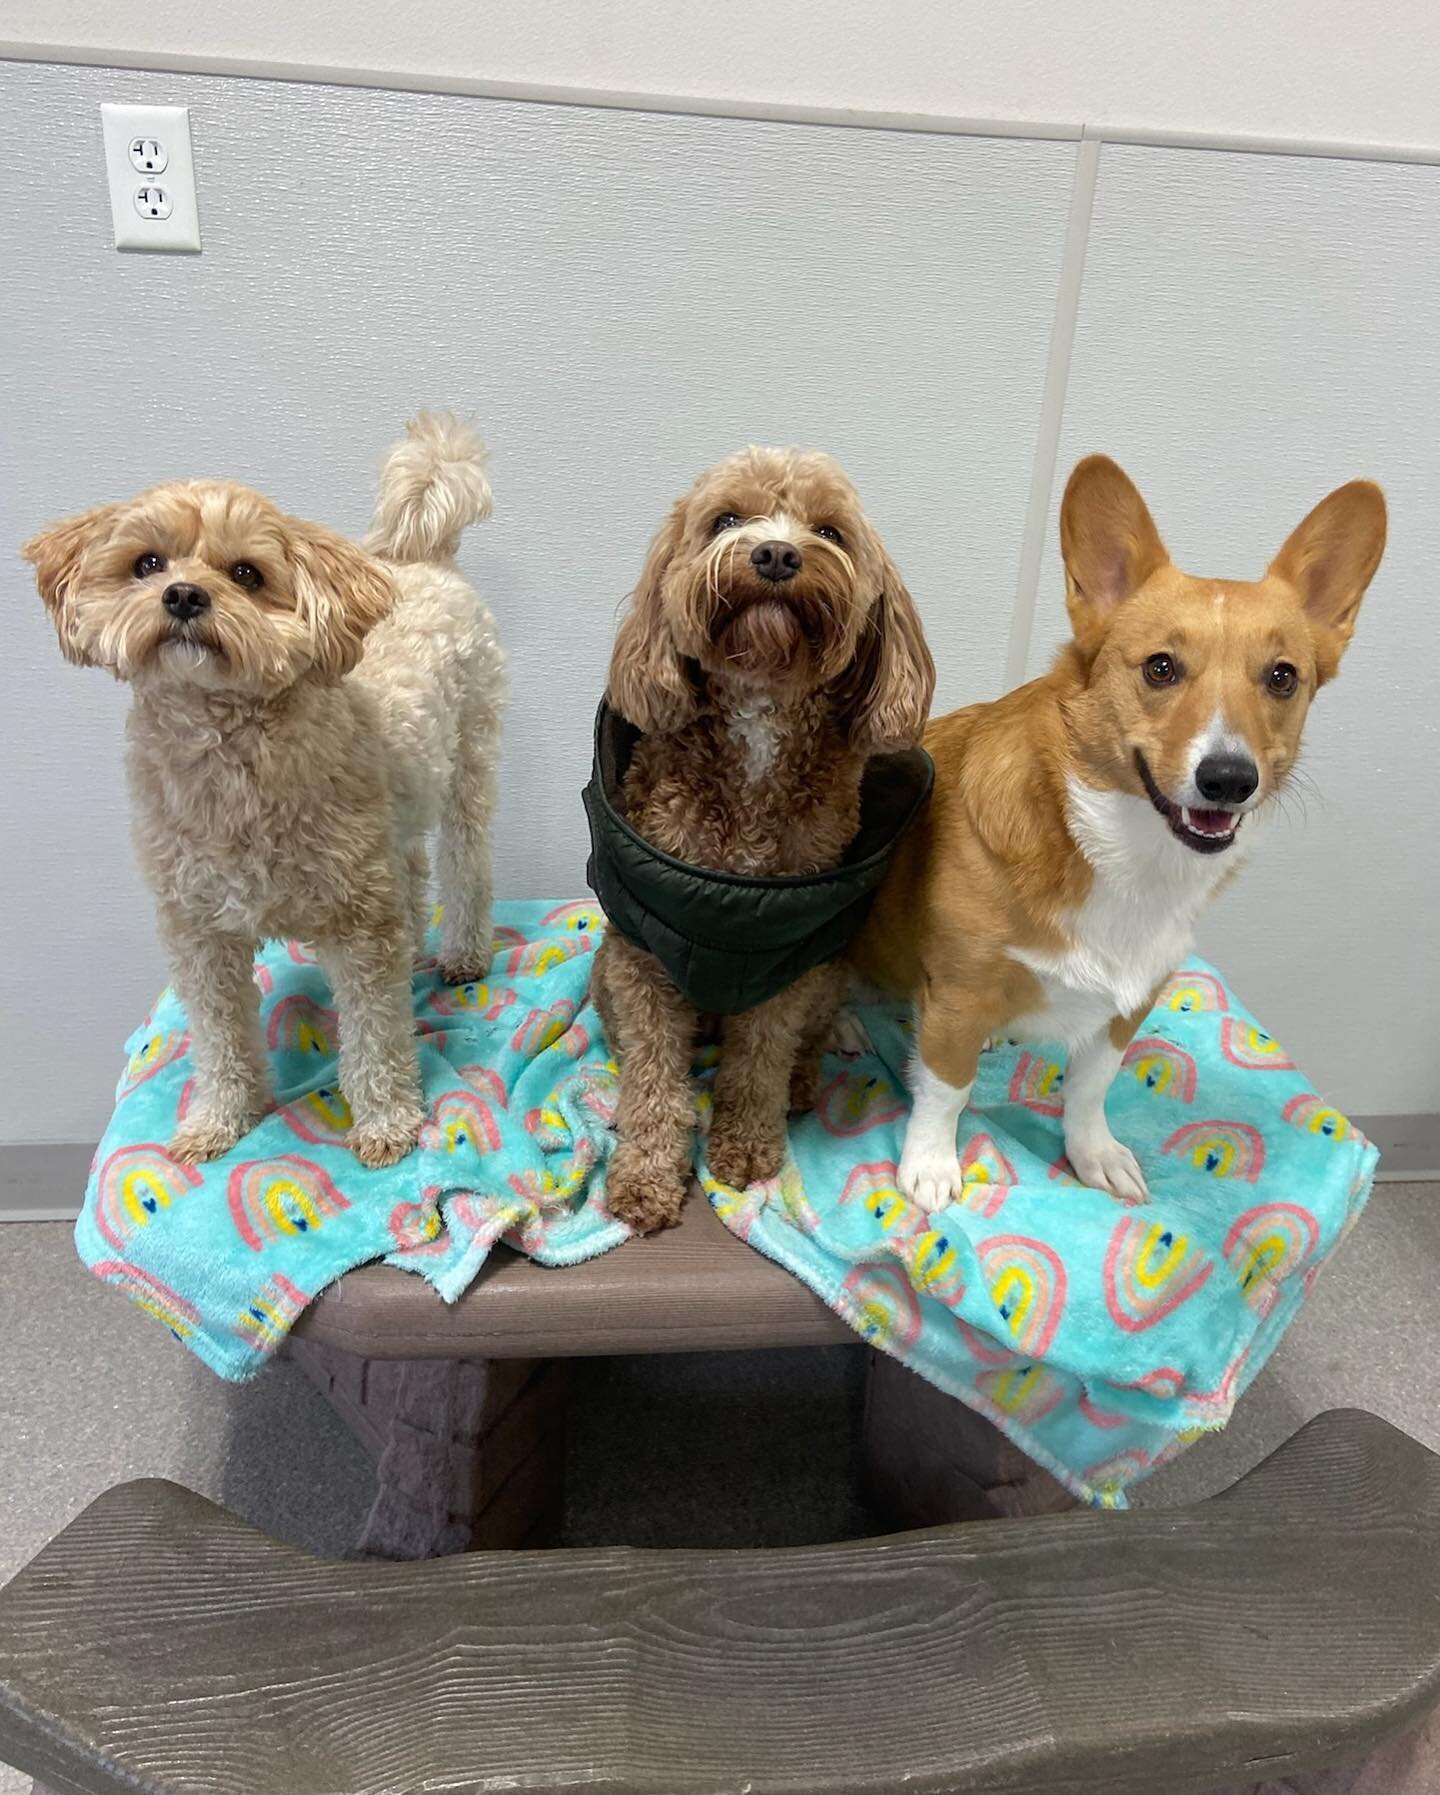 ☯️🐾 The cold temps never bother our little dogs when they&rsquo;ve got indoor play gyms with couches, blankets, and friends to help them keep warm! 
.
.
.
.
.
.
#zendogscenter #waunakeewi #rufferee #doggiedaycare #dogsofinstagram #dogsofmadison #dog